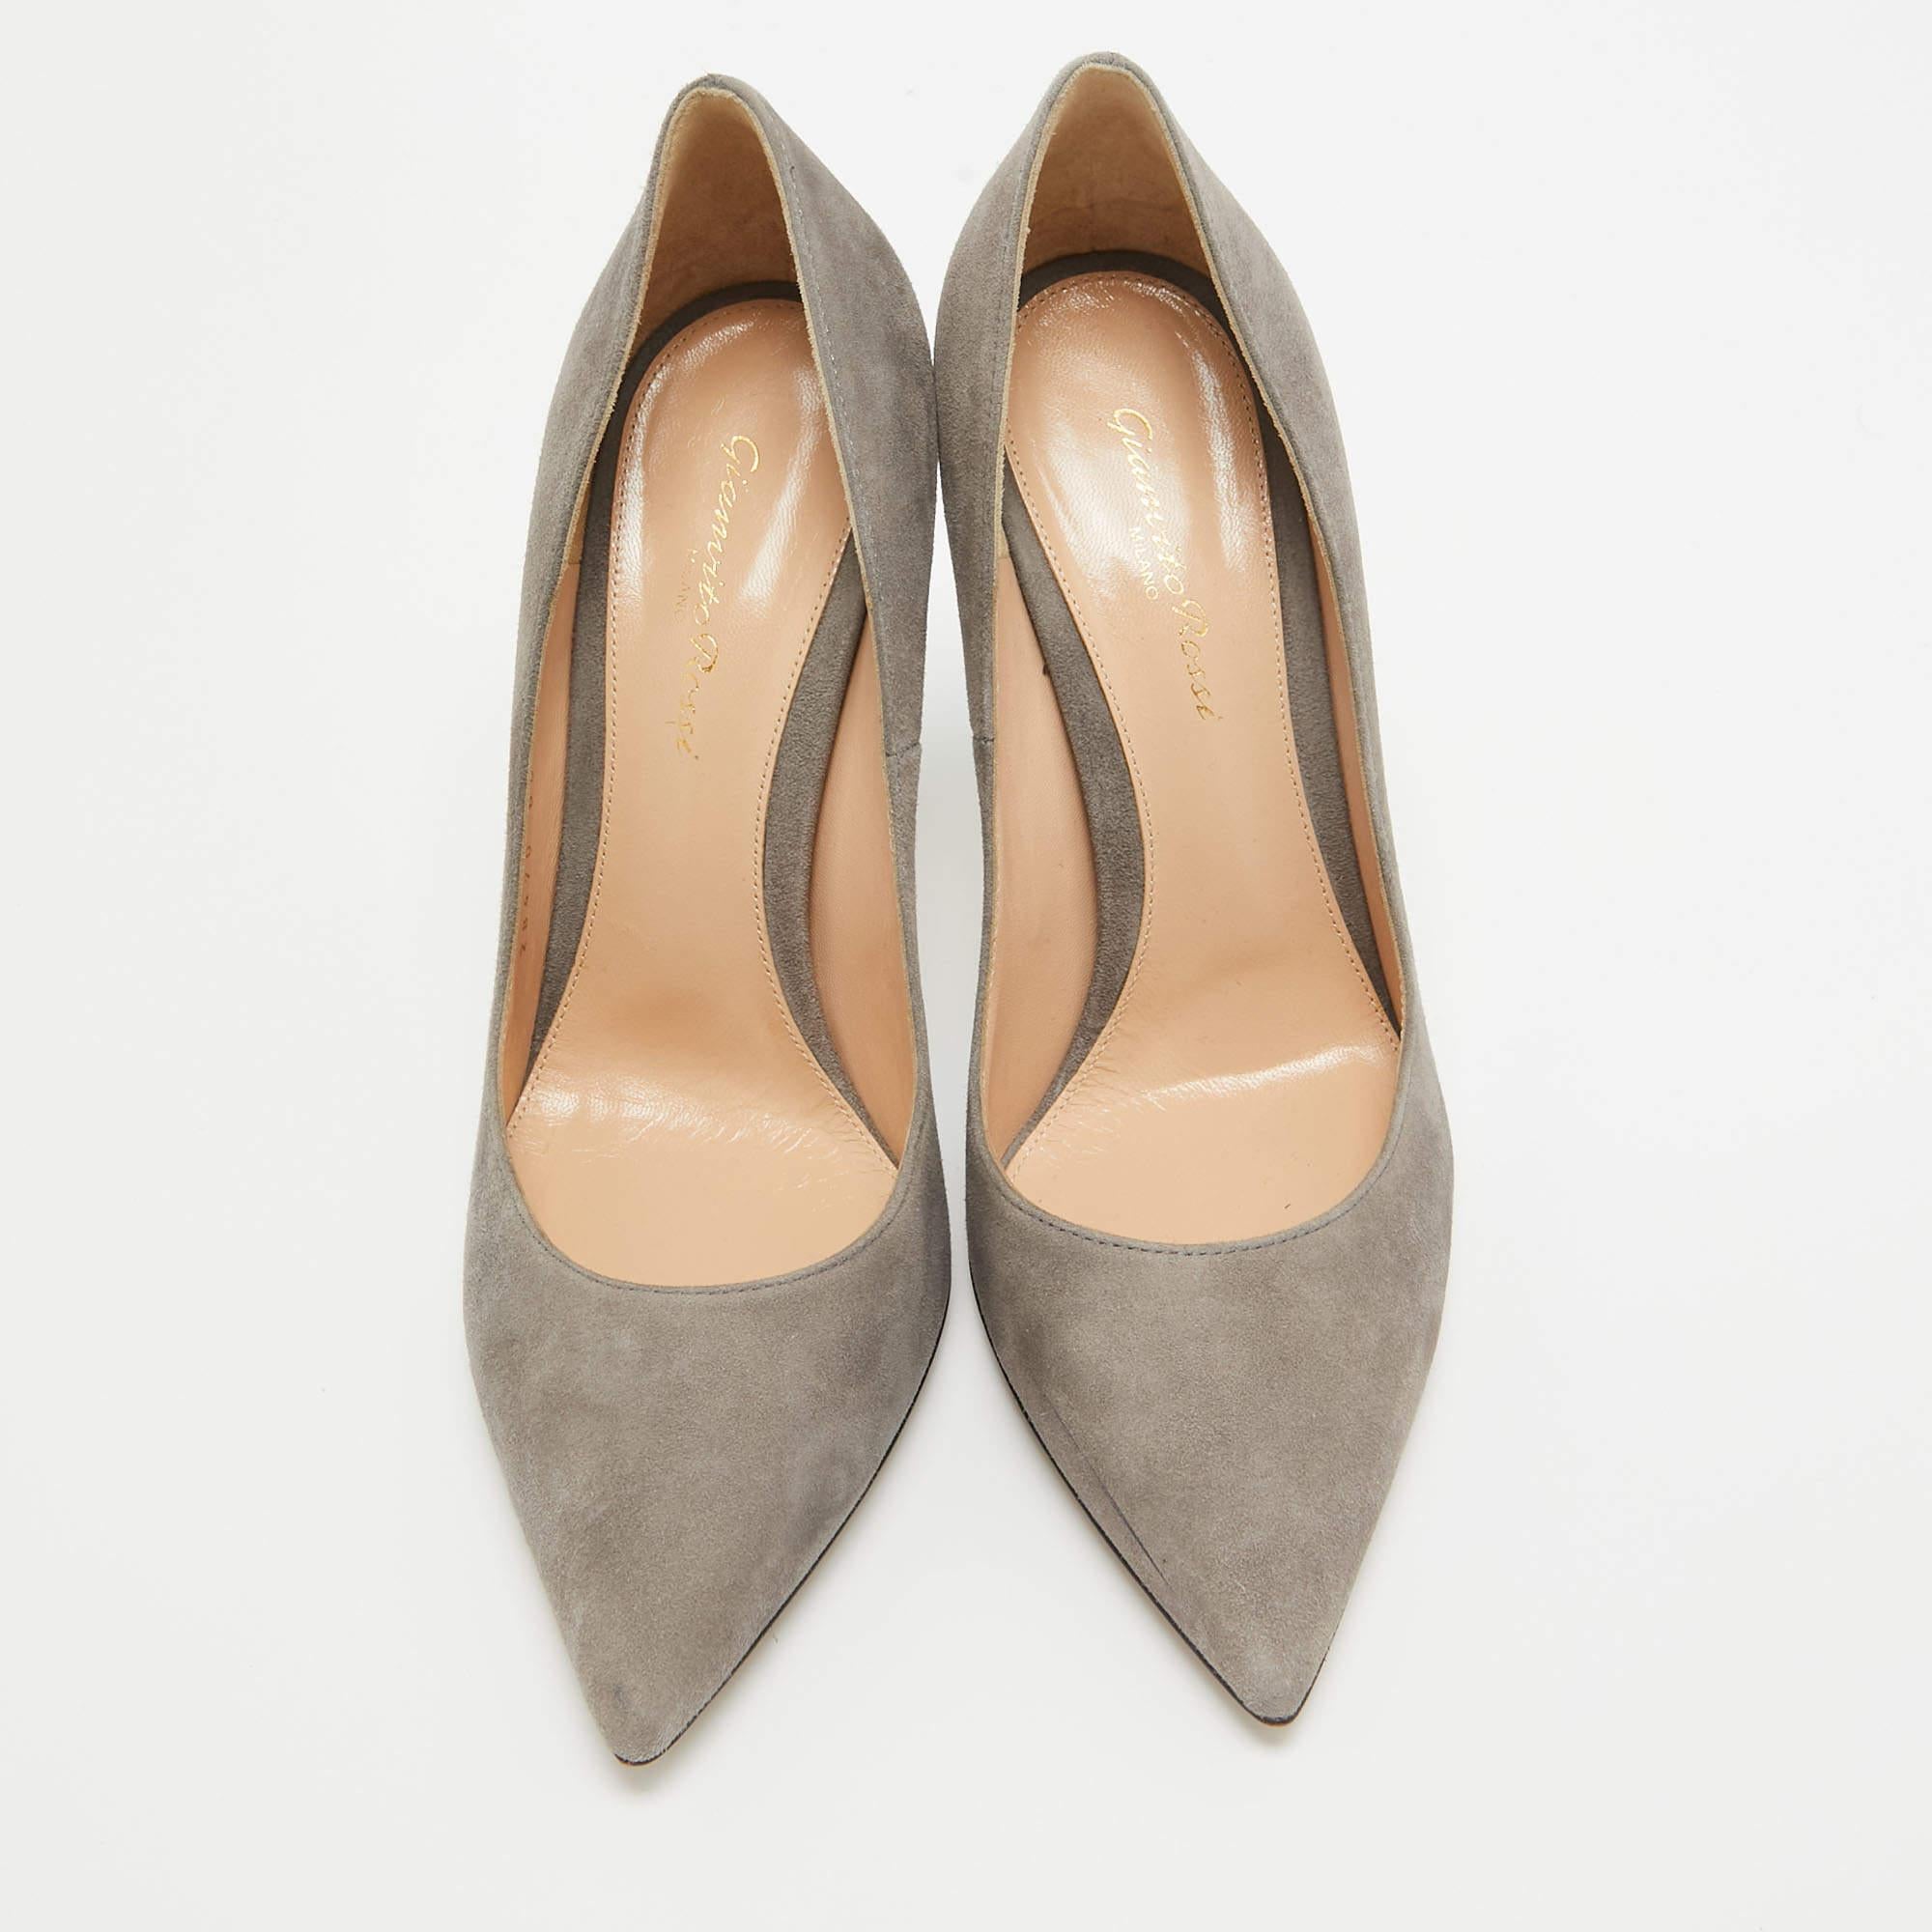 Make a statement with these Gianvito Rossi grey pumps for women. Impeccably crafted, these chic heels offer both fashion and comfort, elevating your look with each graceful step.

